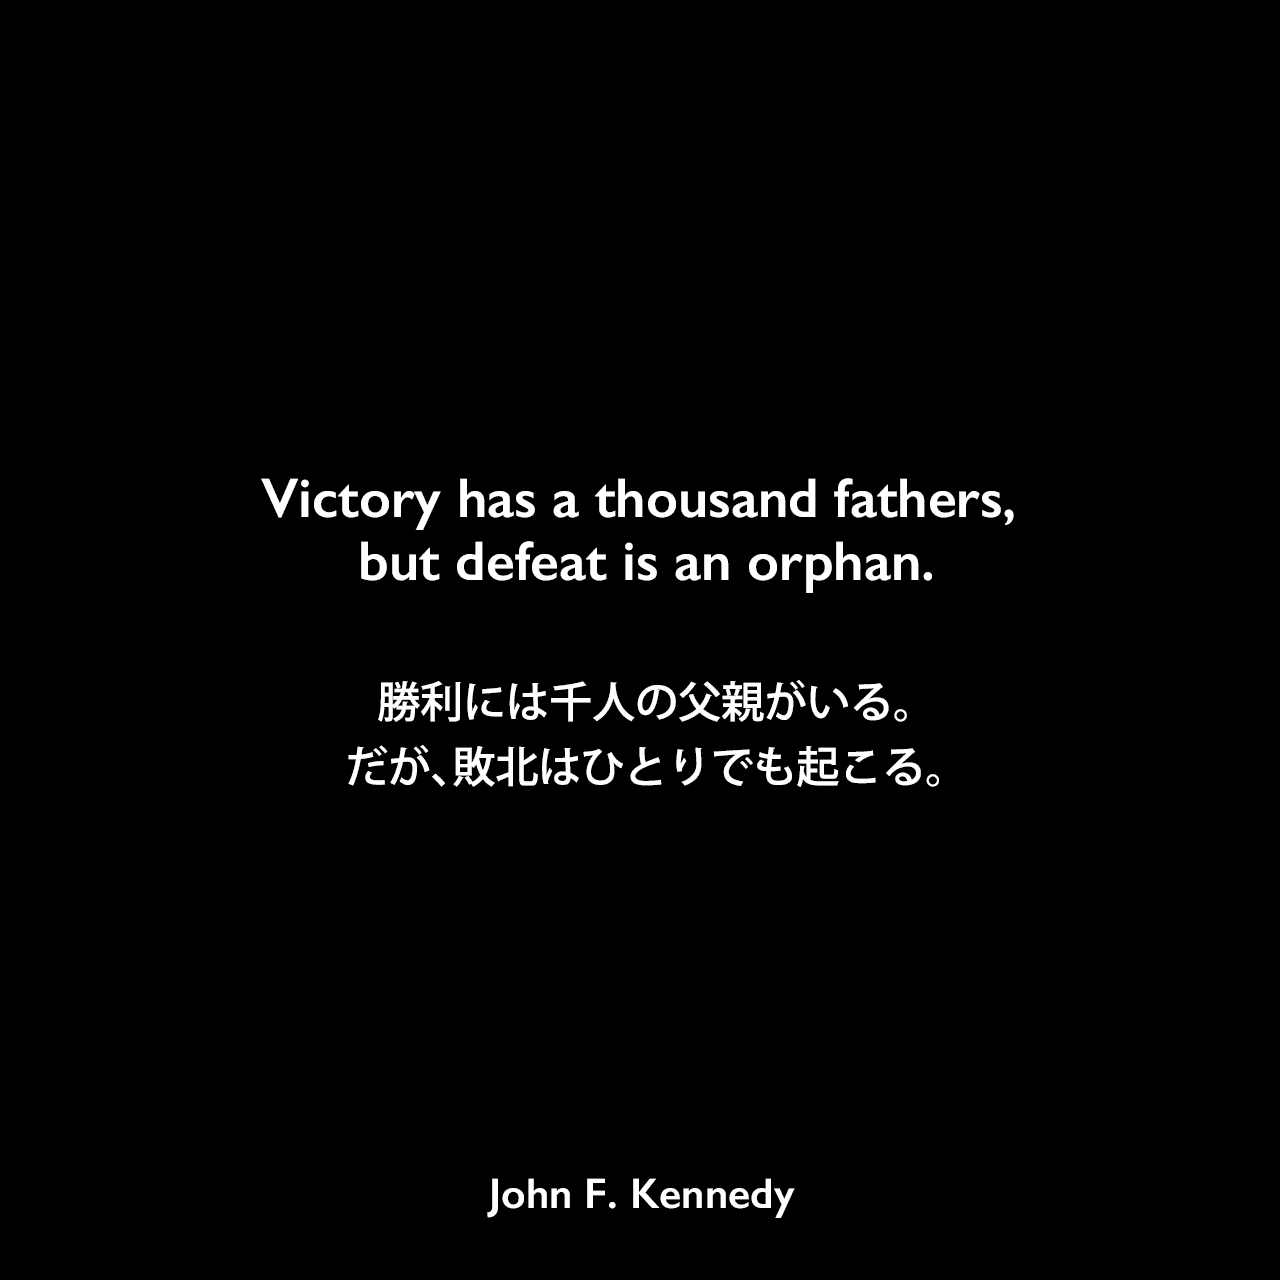 Victory has a thousand fathers, but defeat is an orphan.勝利には千人の父親がいる。だが、敗北はひとりでも起こる。John F Kennedy